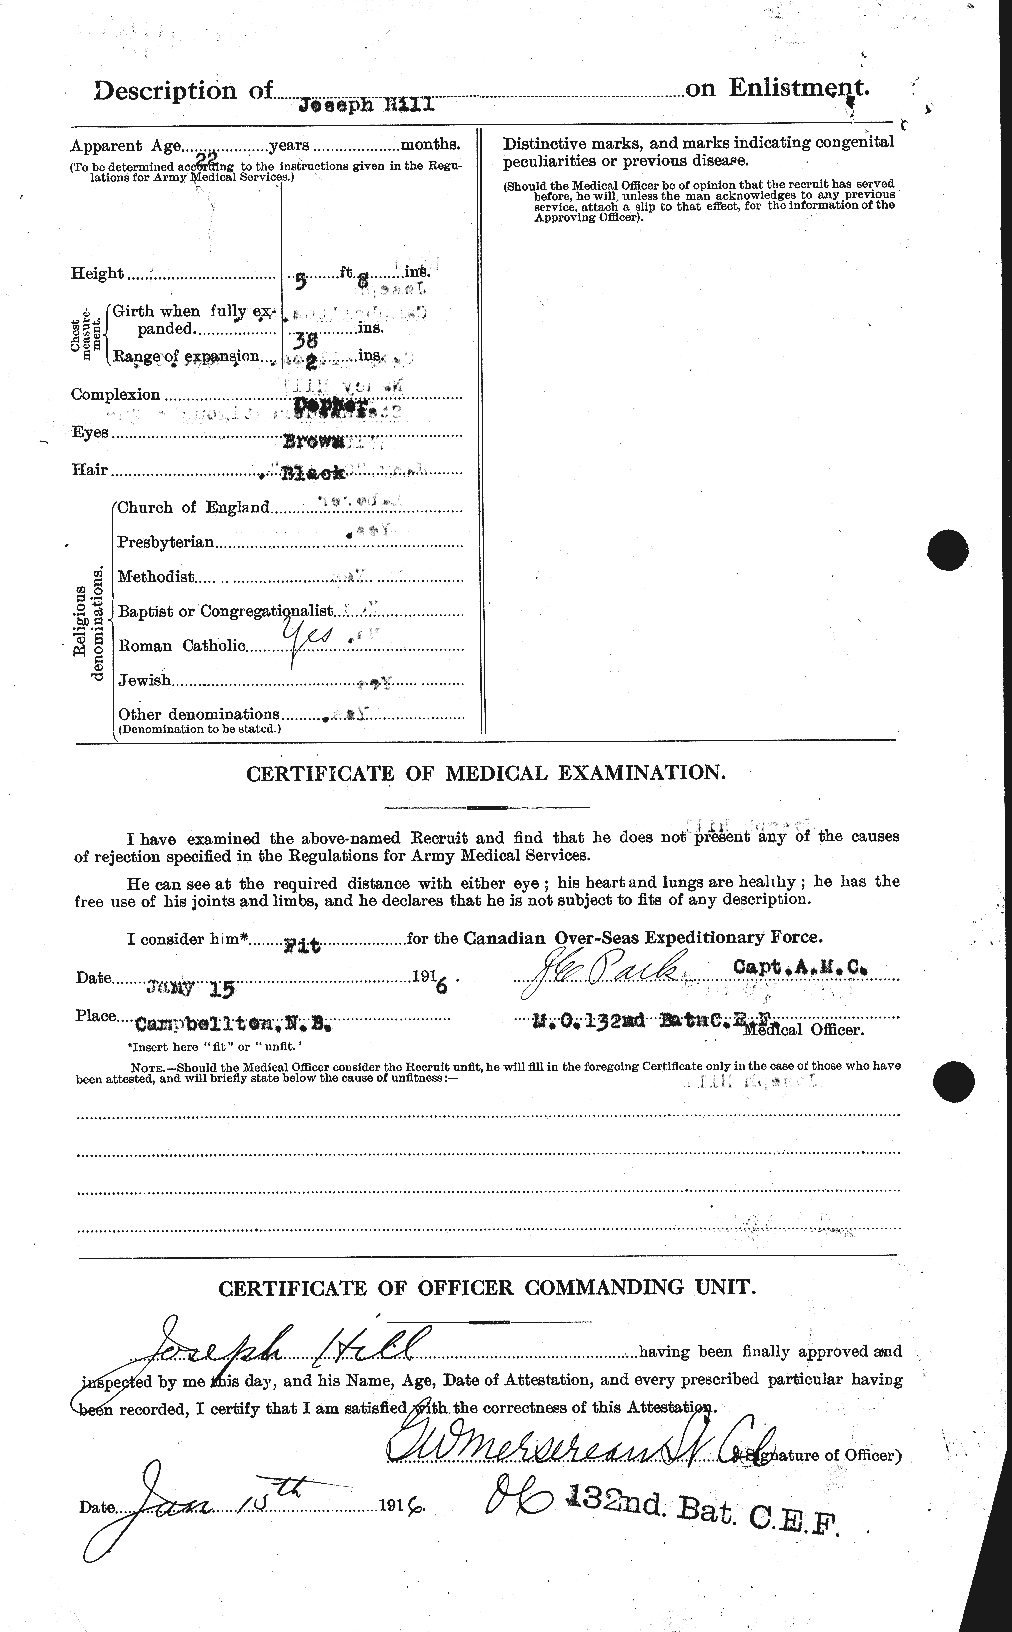 Personnel Records of the First World War - CEF 404211b